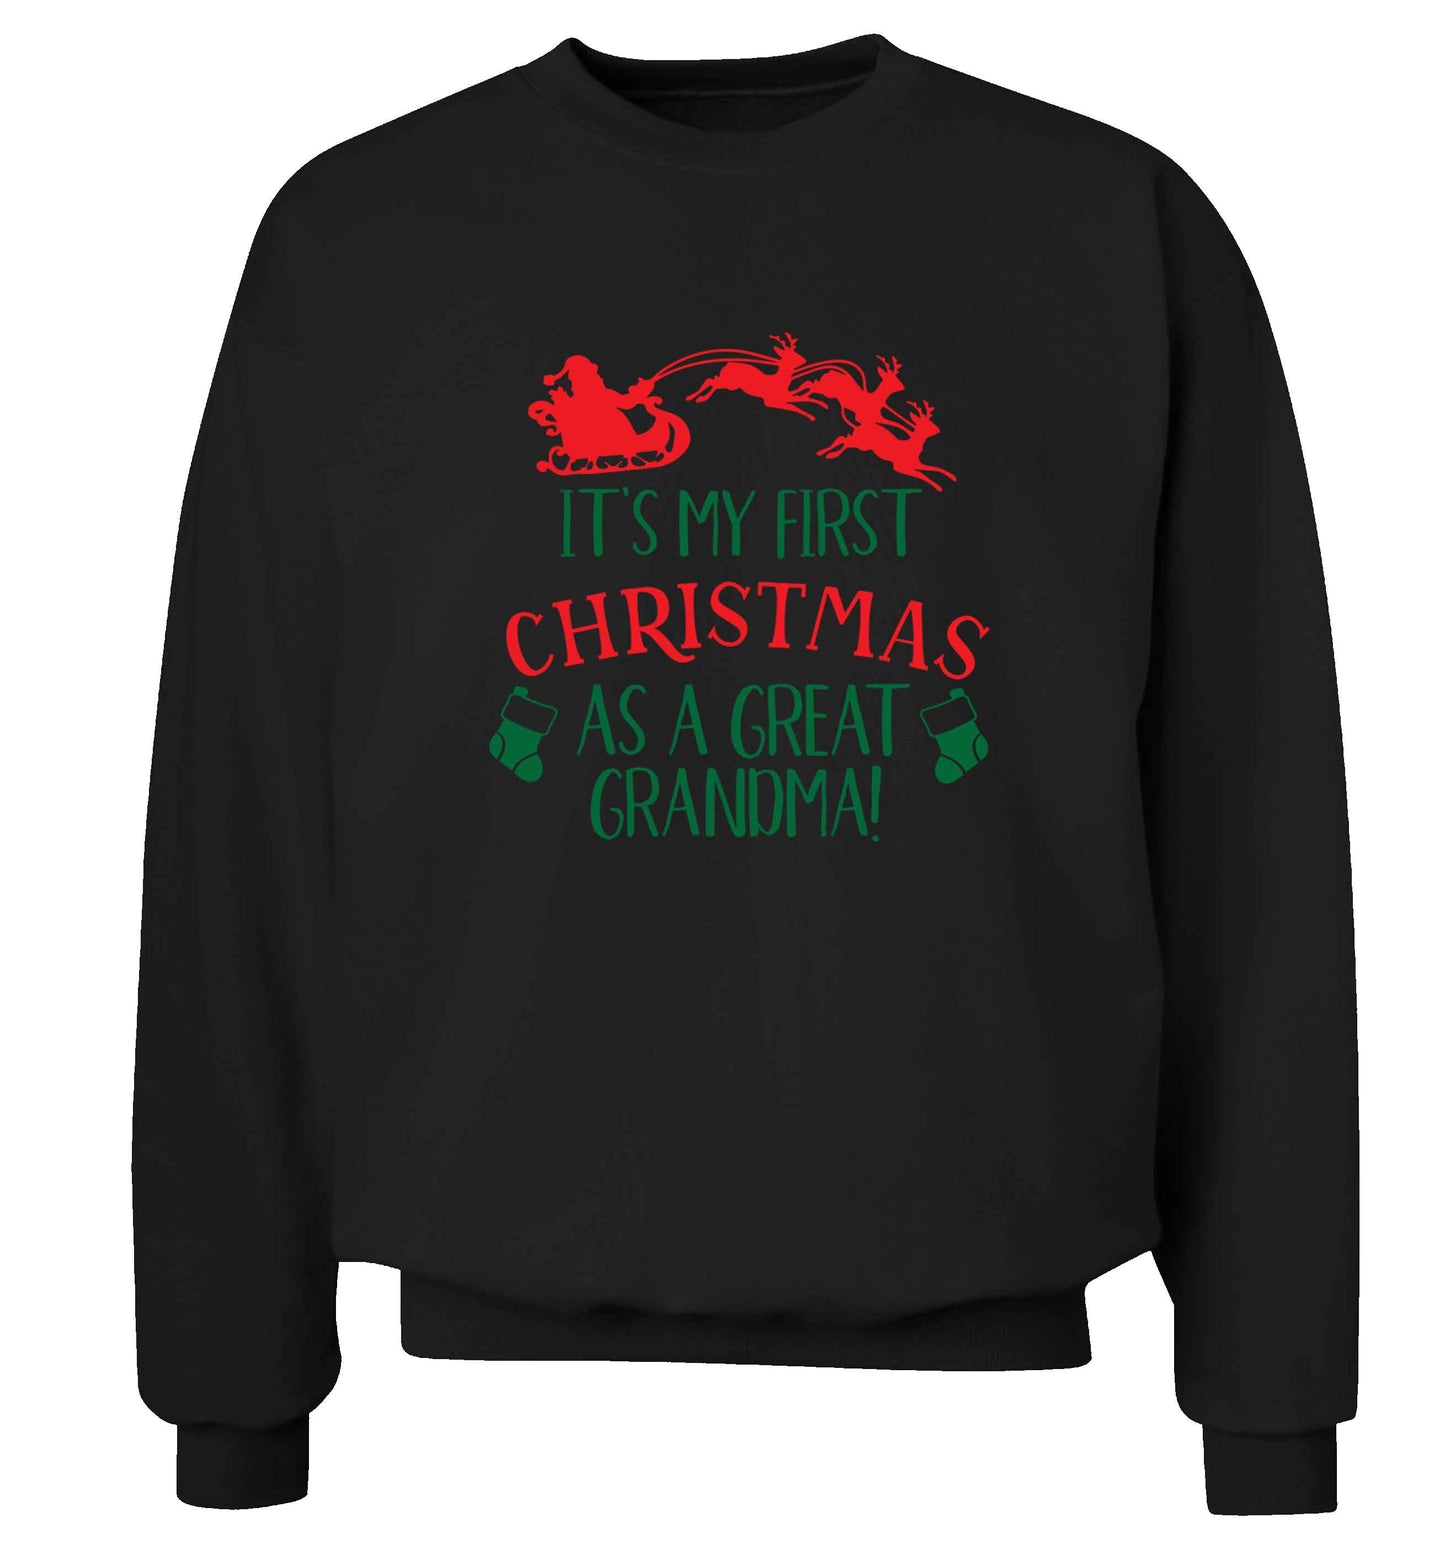 It's my first Christmas as a great grandma! Adult's unisex black Sweater 2XL